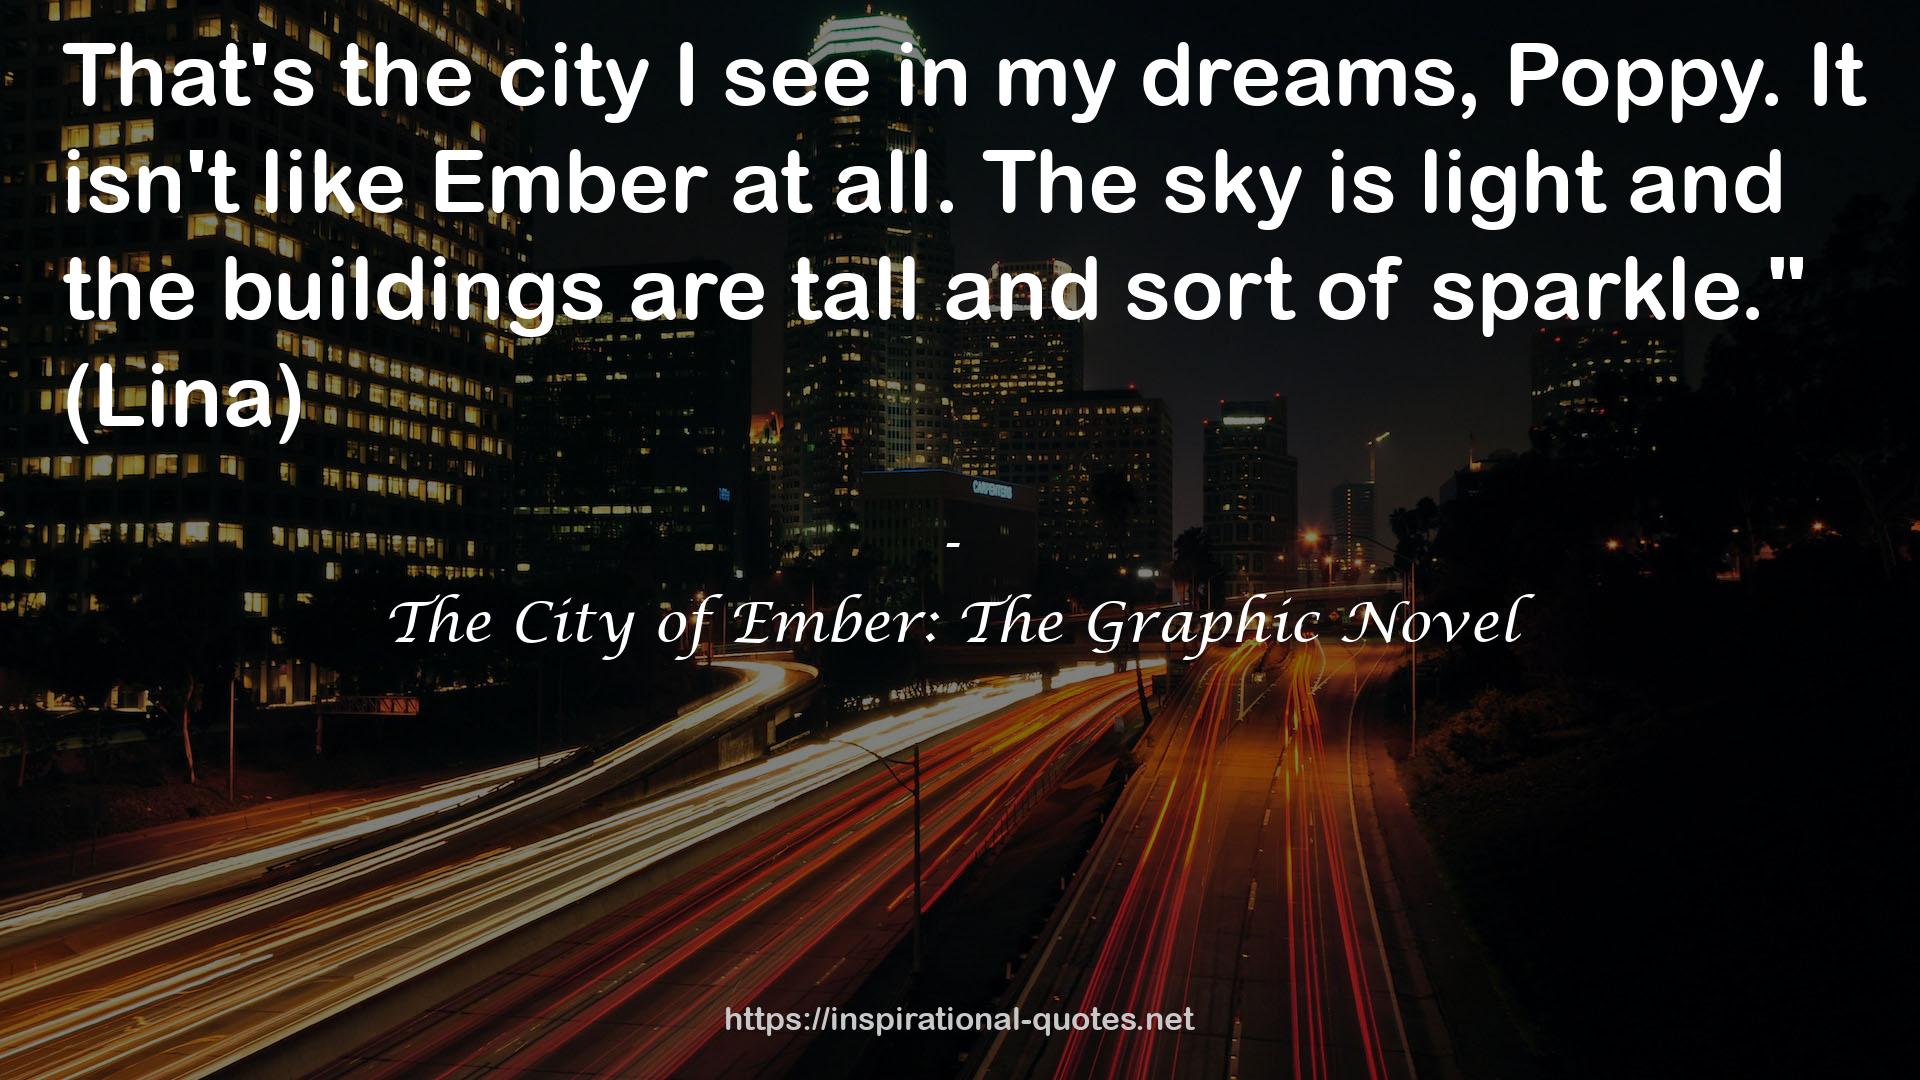 The City of Ember: The Graphic Novel QUOTES